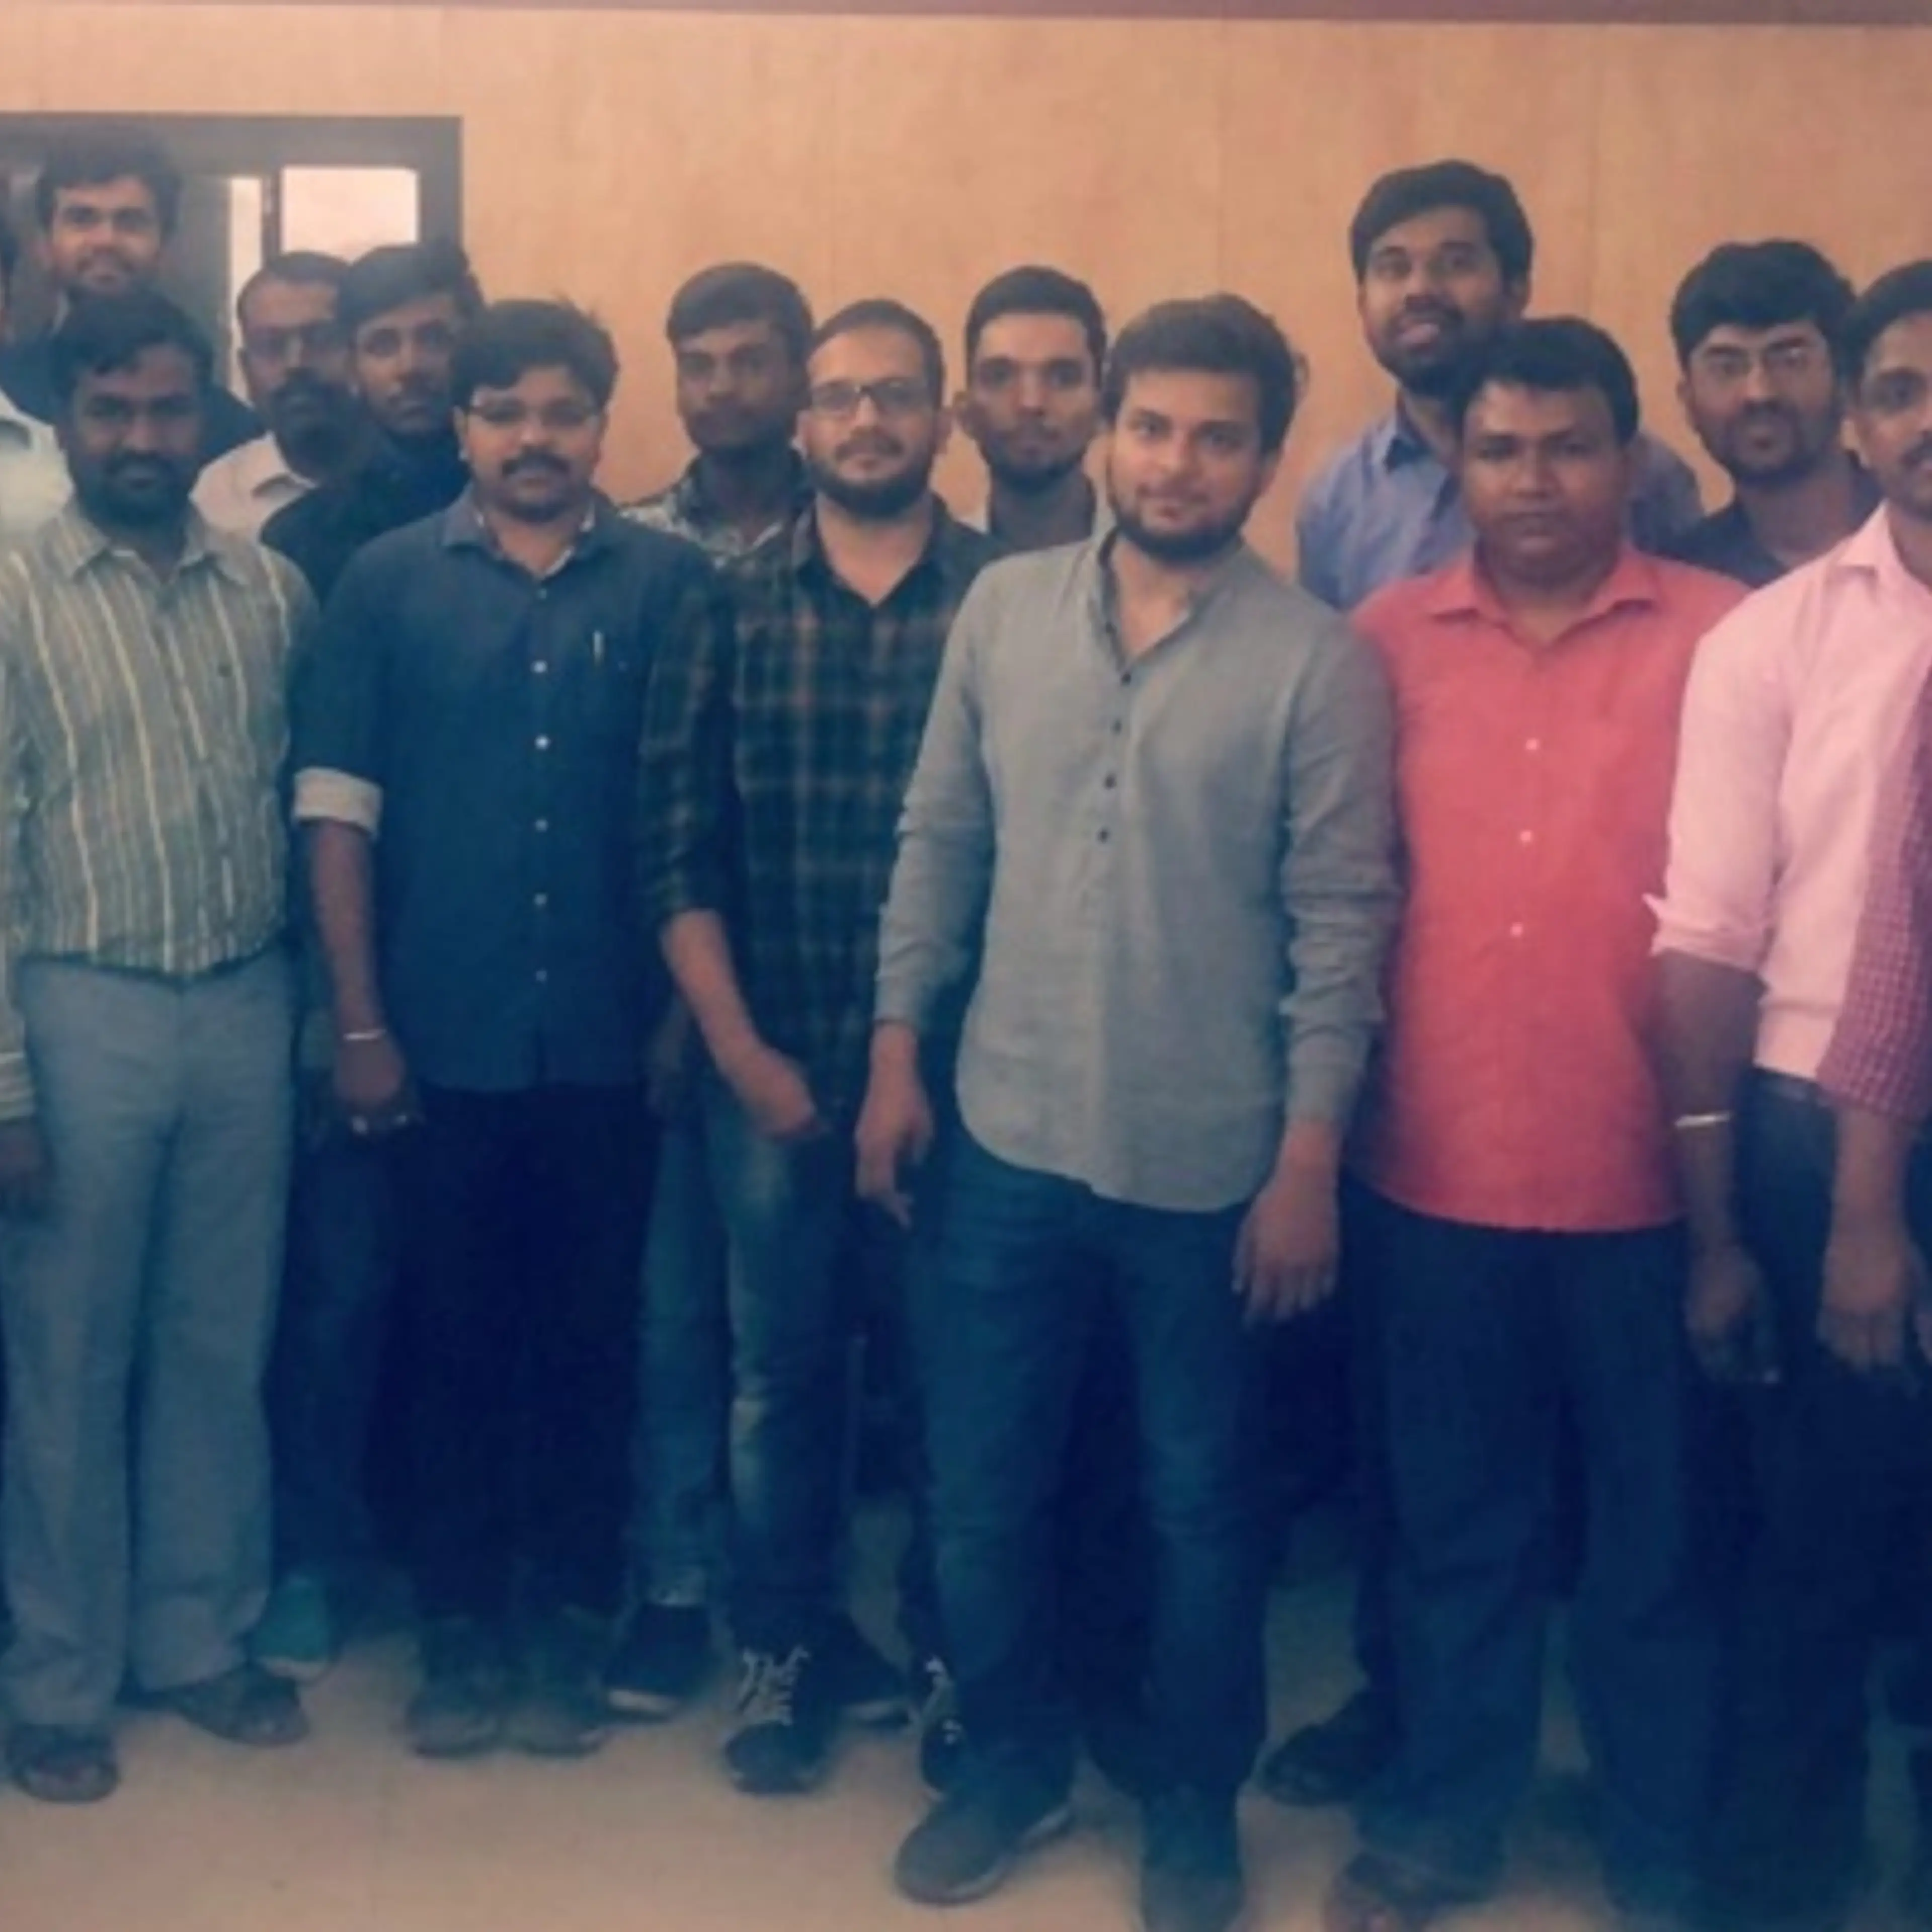 [Funding alert] Ethereal Machines raises $1M pre-Series A led by Blume Ventures